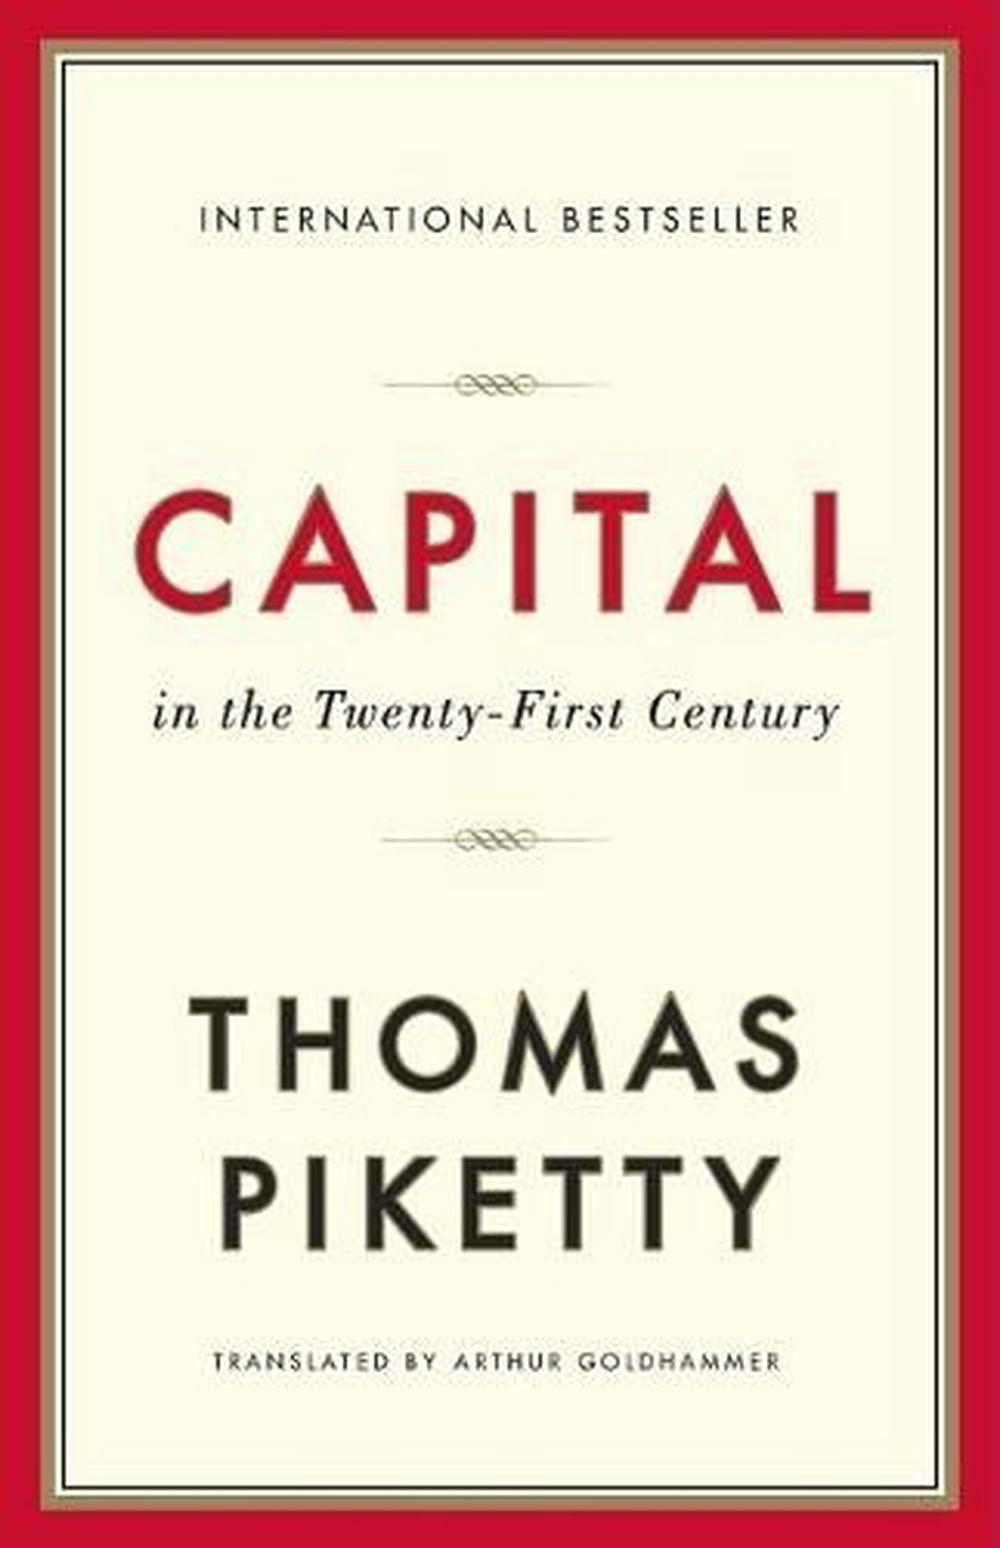 Piketty,　Capital　online　by　at　Twenty-First　Paperback,　9780674979857　in　The　Thomas　the　Buy　Century　Nile